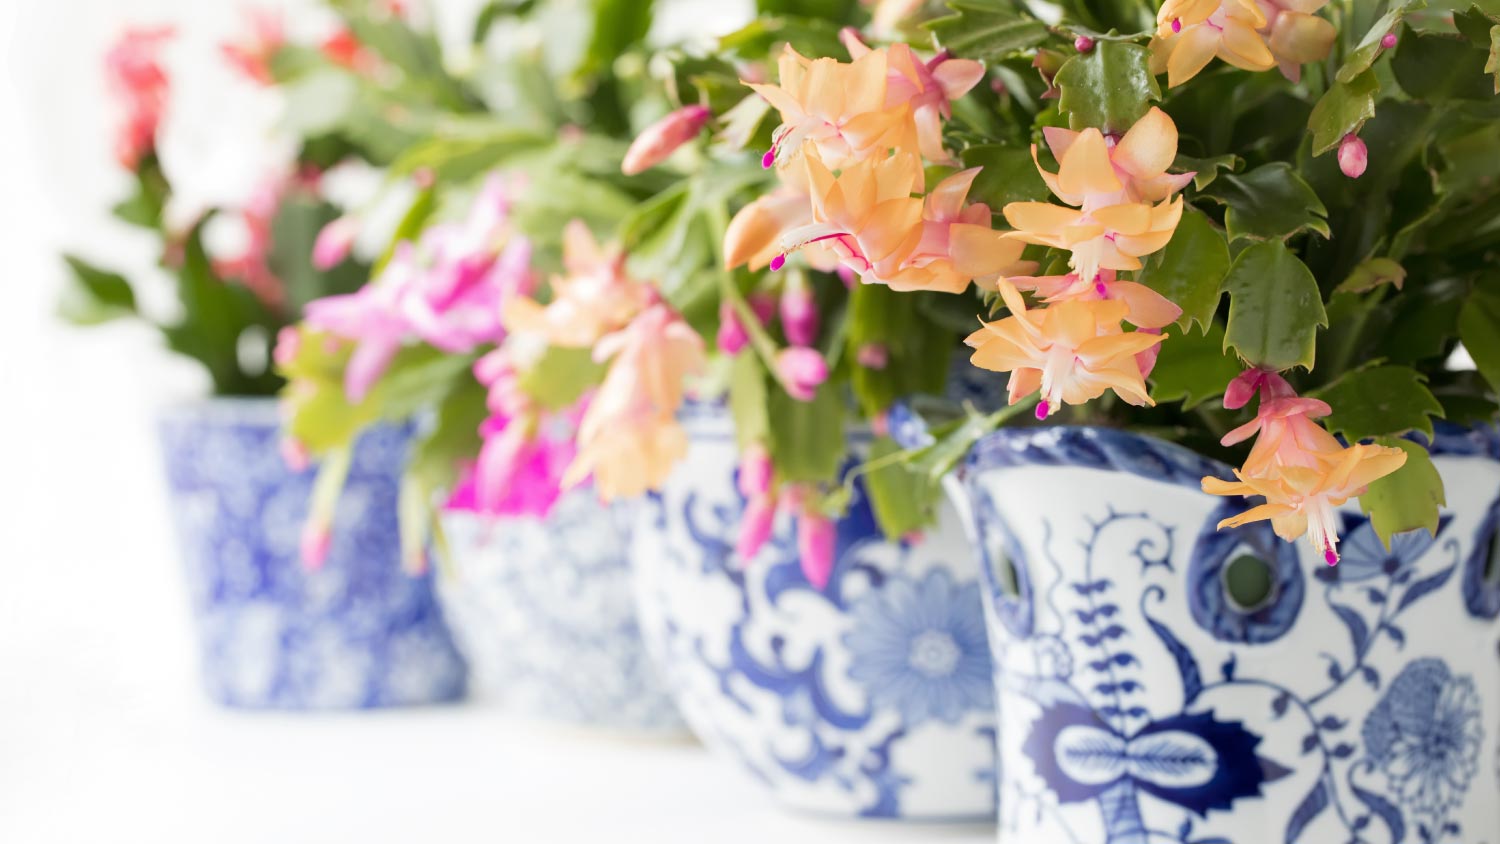 Different colored Christmas Cactus plants in blue and white planters